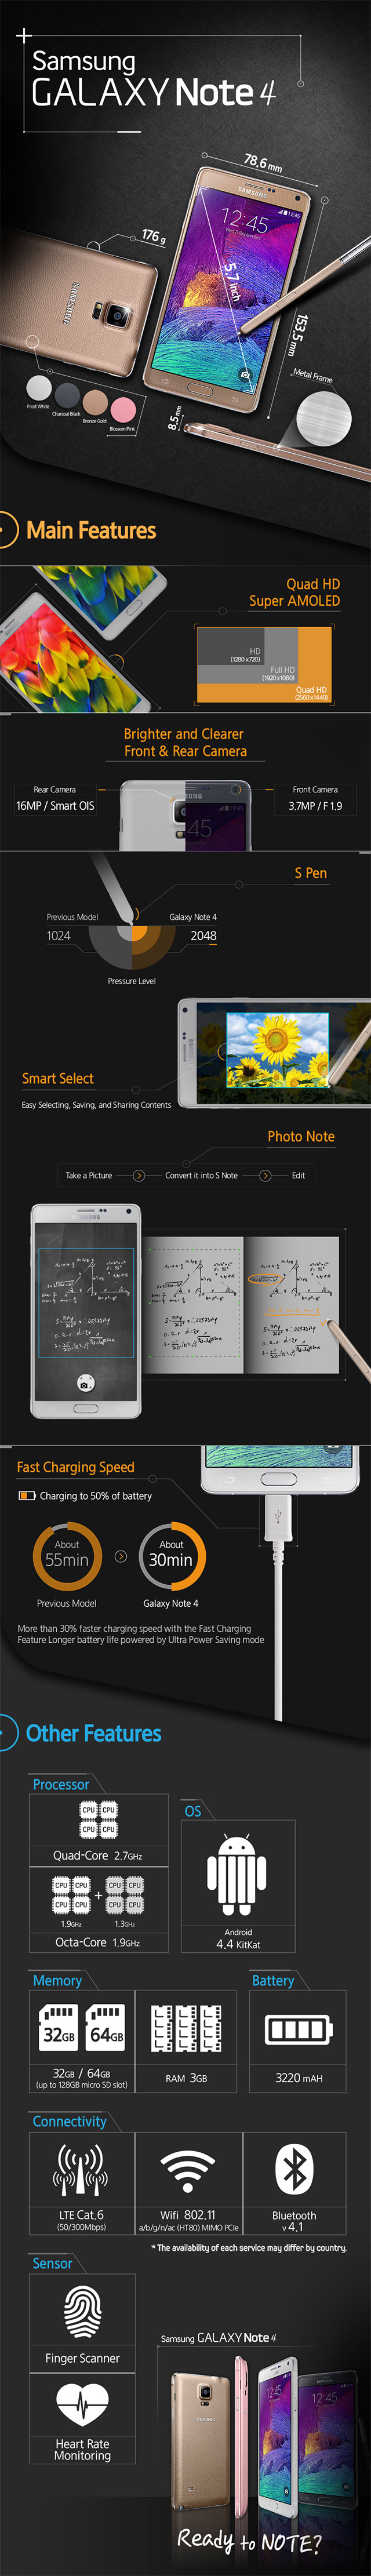 Galaxy Note 4 Features and Specifications Infographic